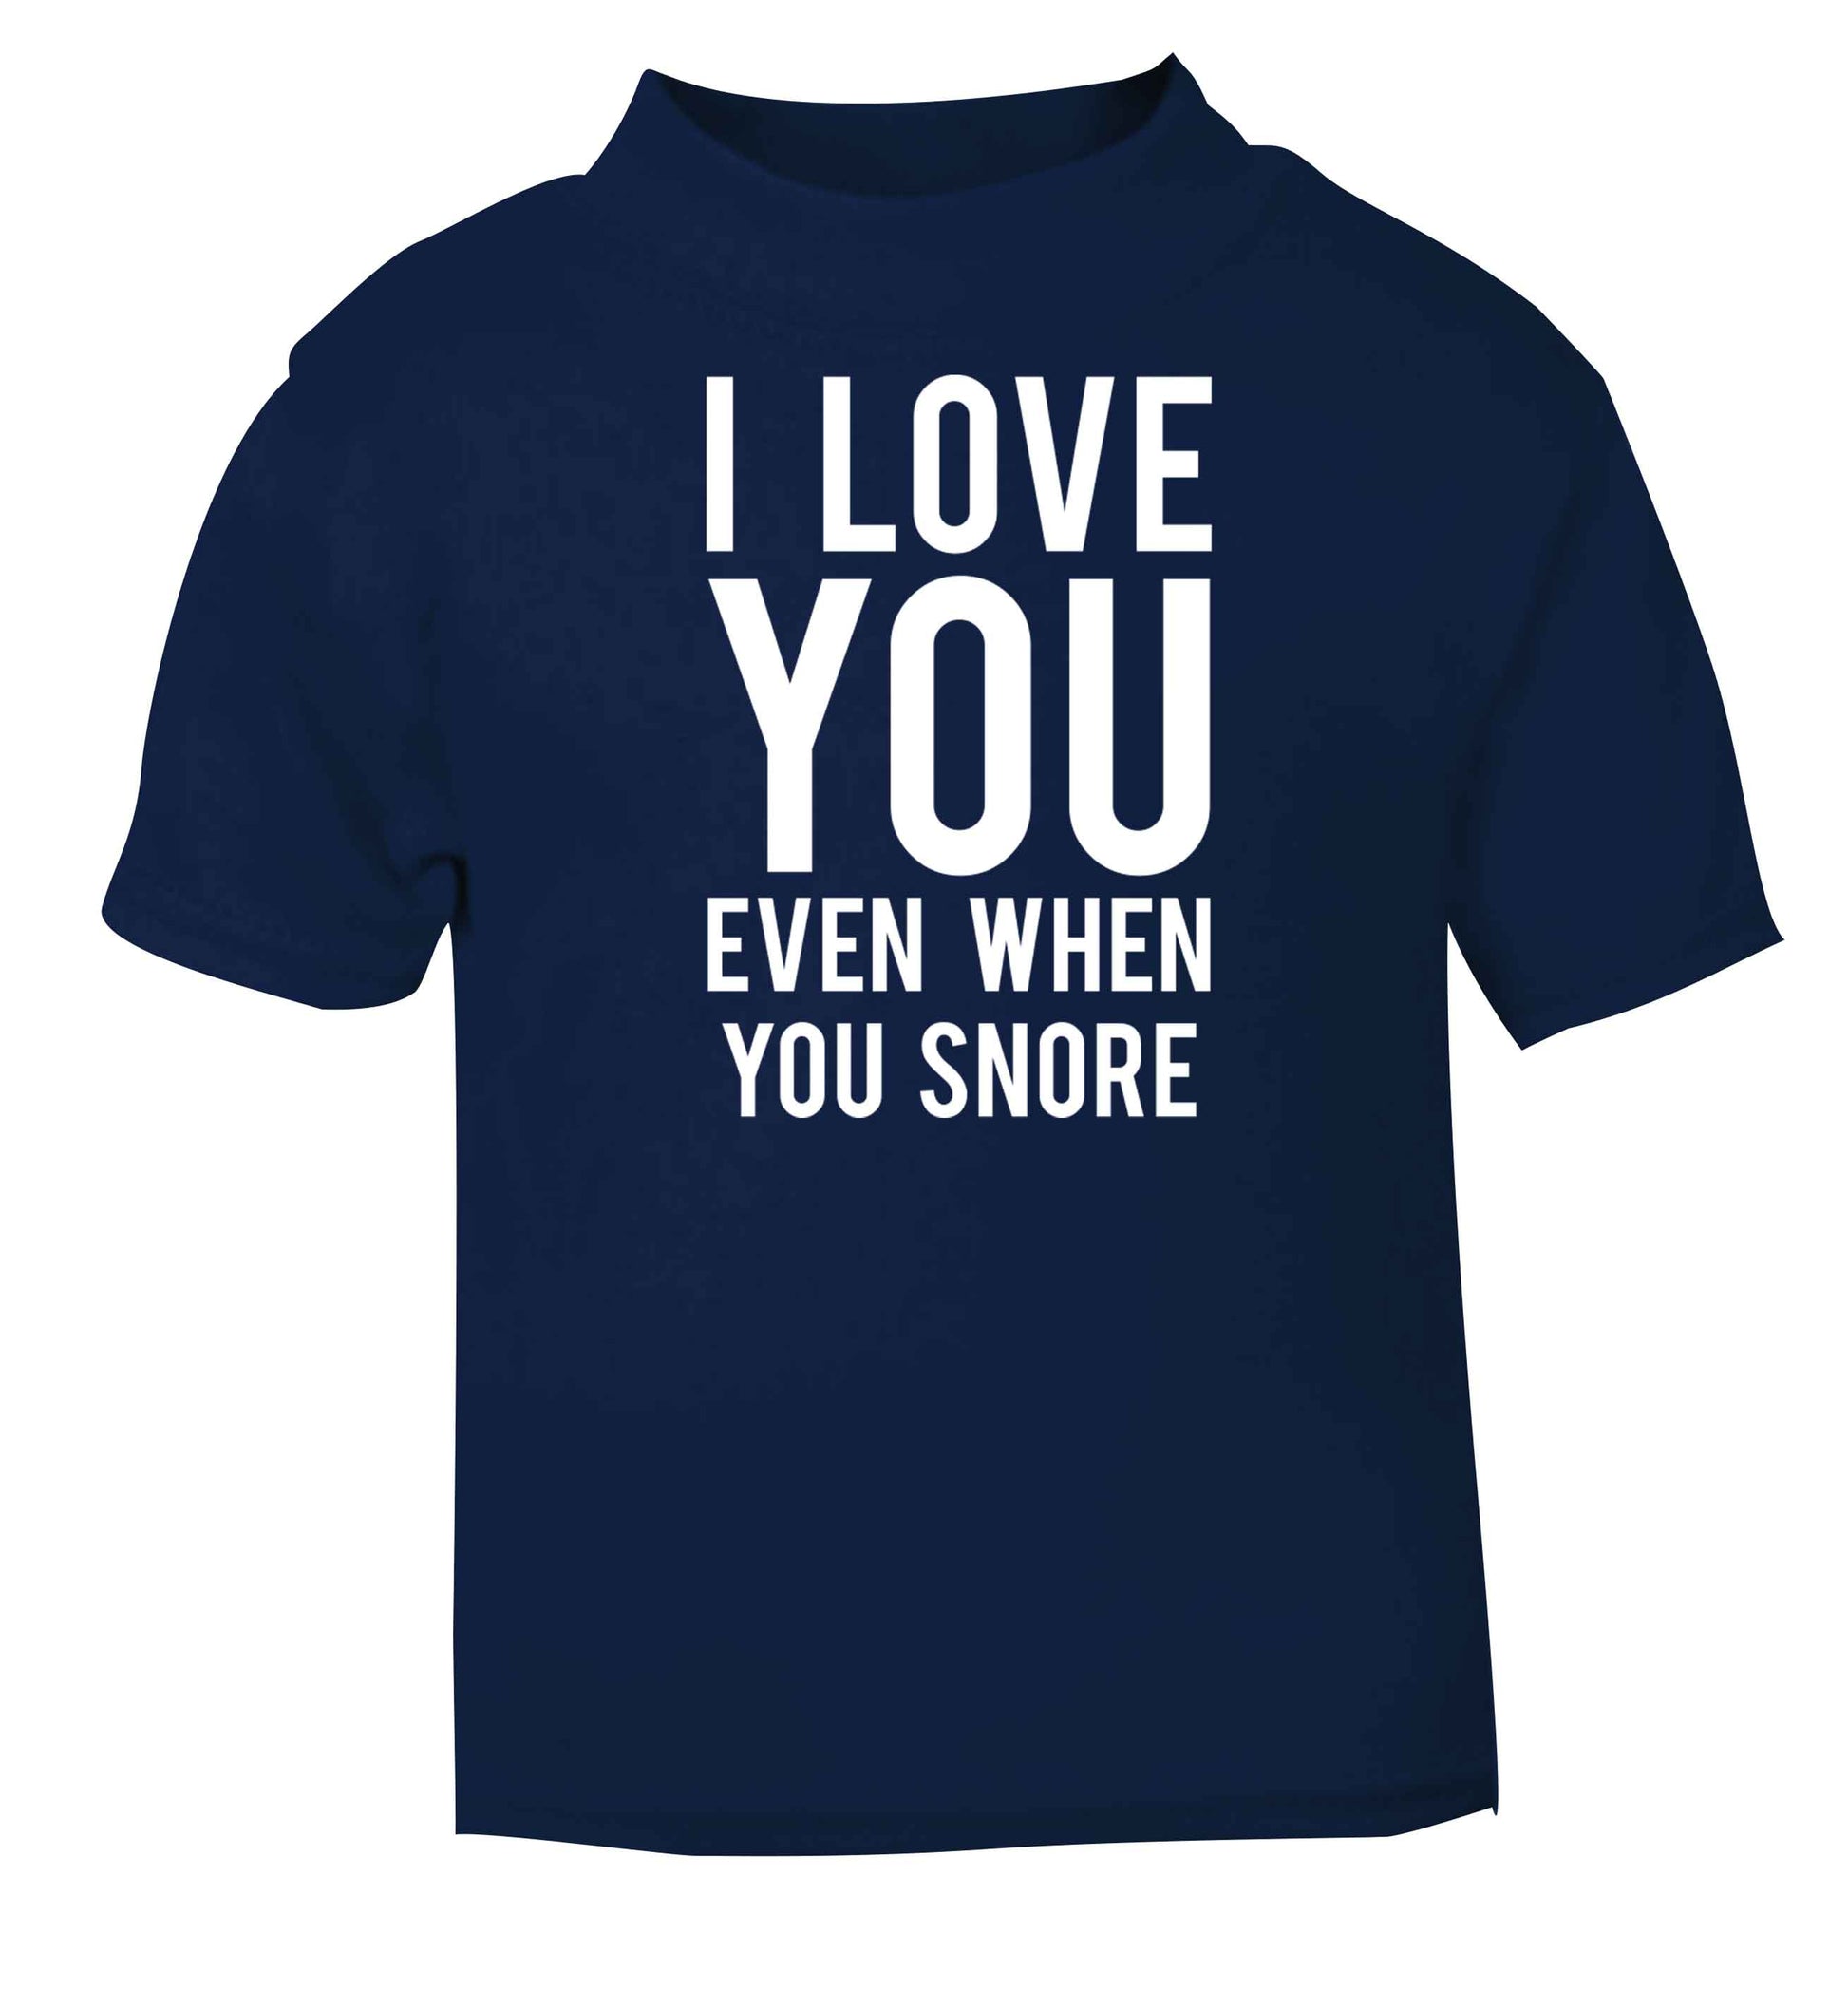 I love you even when you snore navy baby toddler Tshirt 2 Years